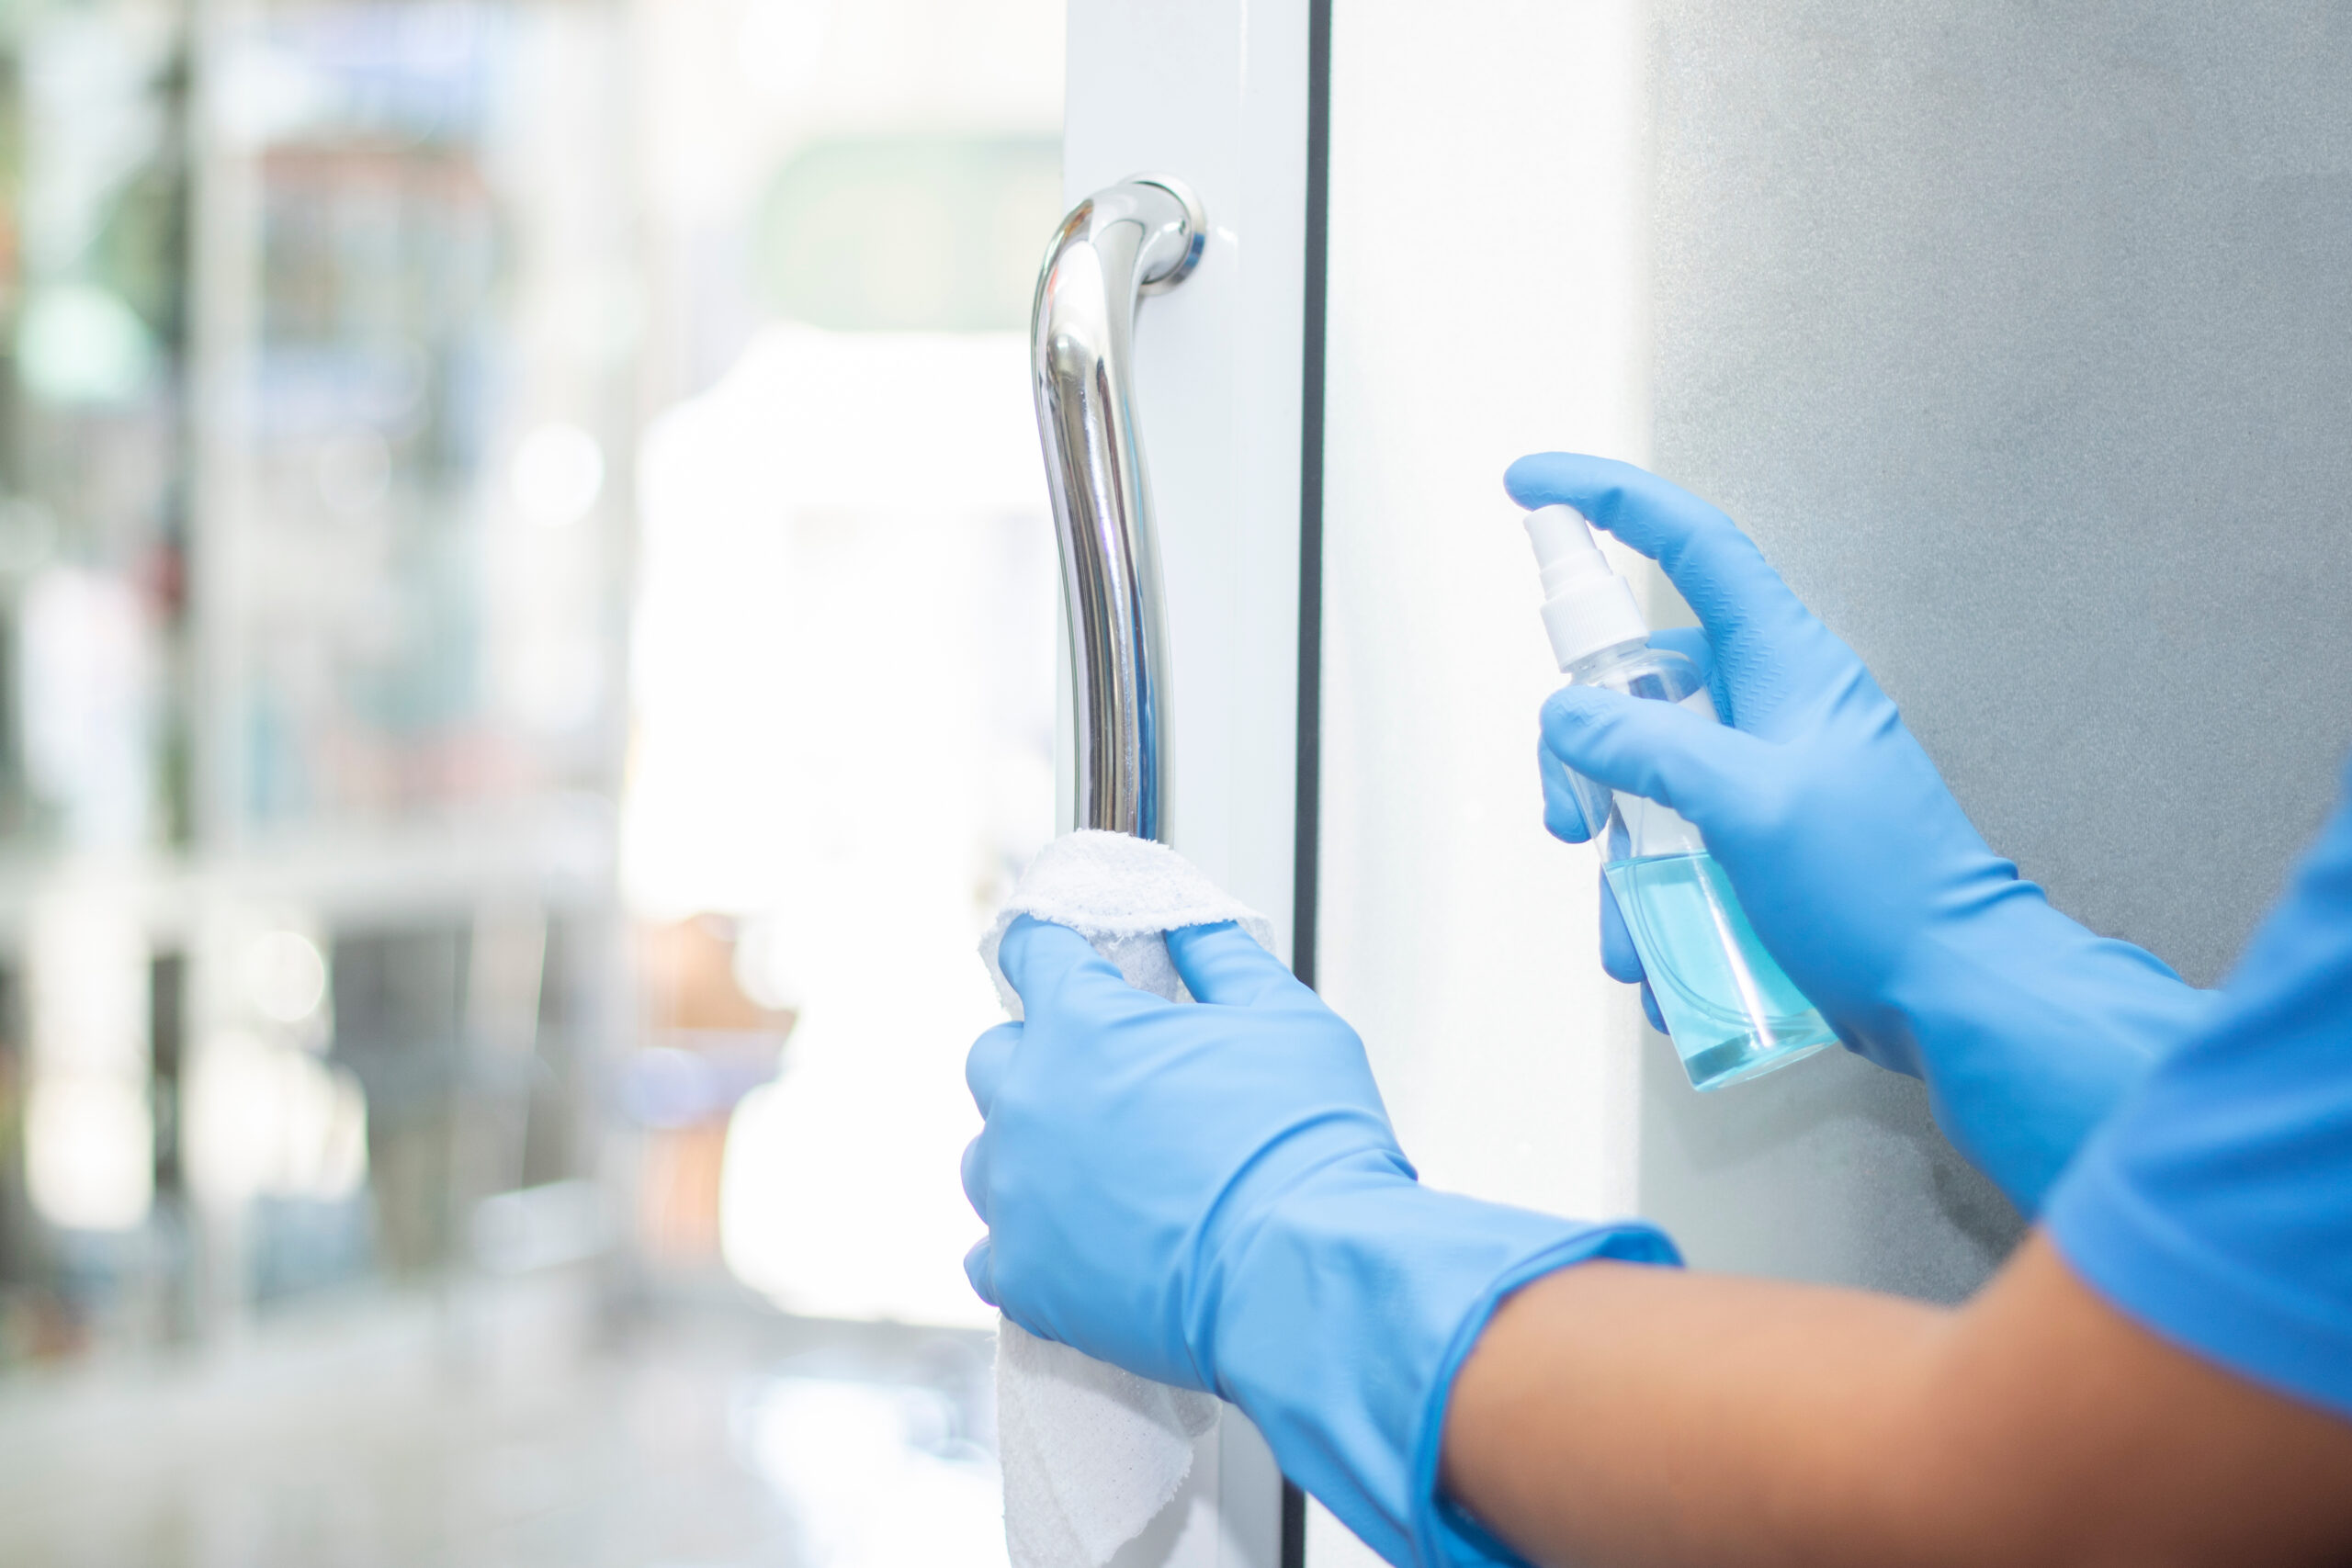 5 Common Workplace Cleaning Mistakes and How to Avoid Them